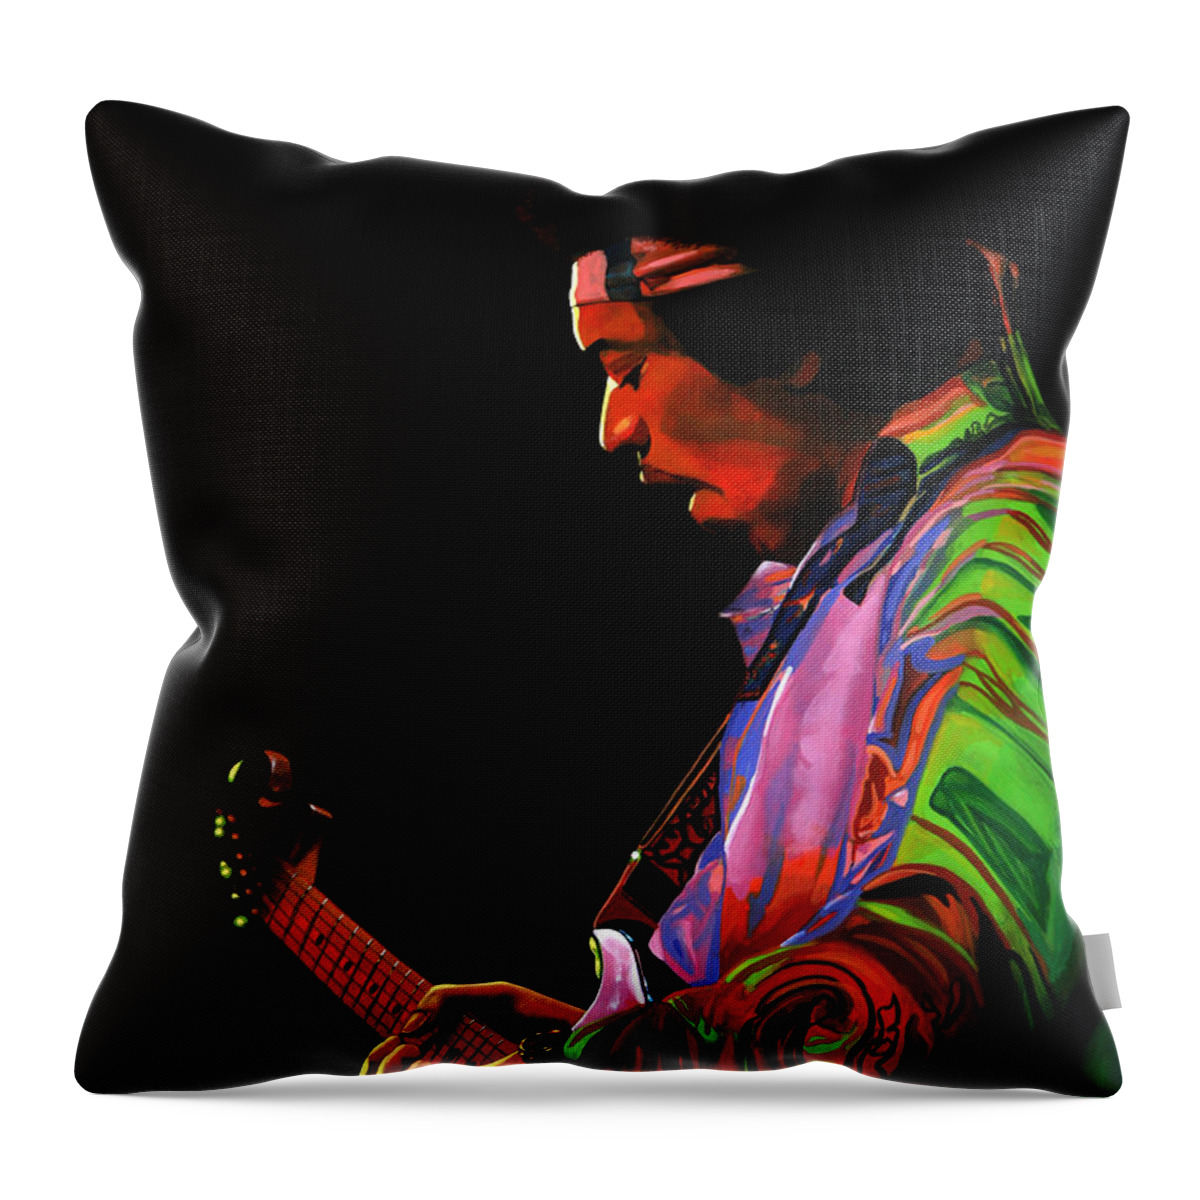 Jimi Hendrix Throw Pillow featuring the painting Jimi Hendrix 4 by Paul Meijering